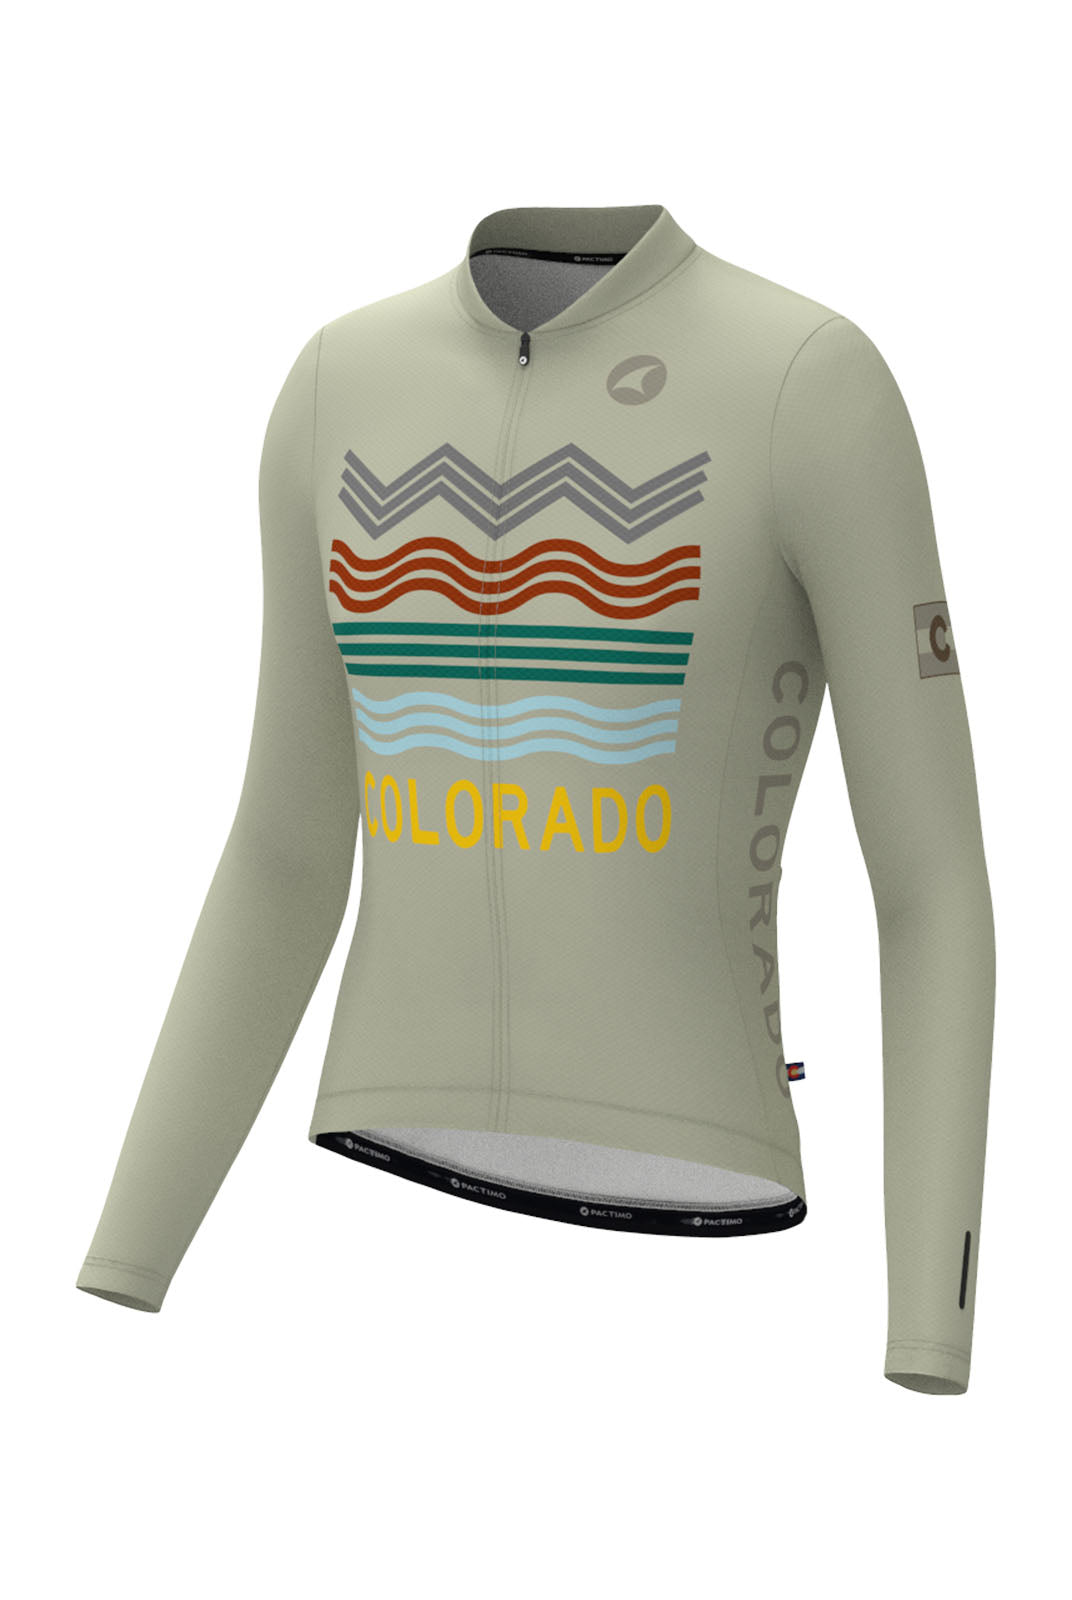 Men's White Colorado Long Sleeve Cycling Jersey - Ascent Aero Front View